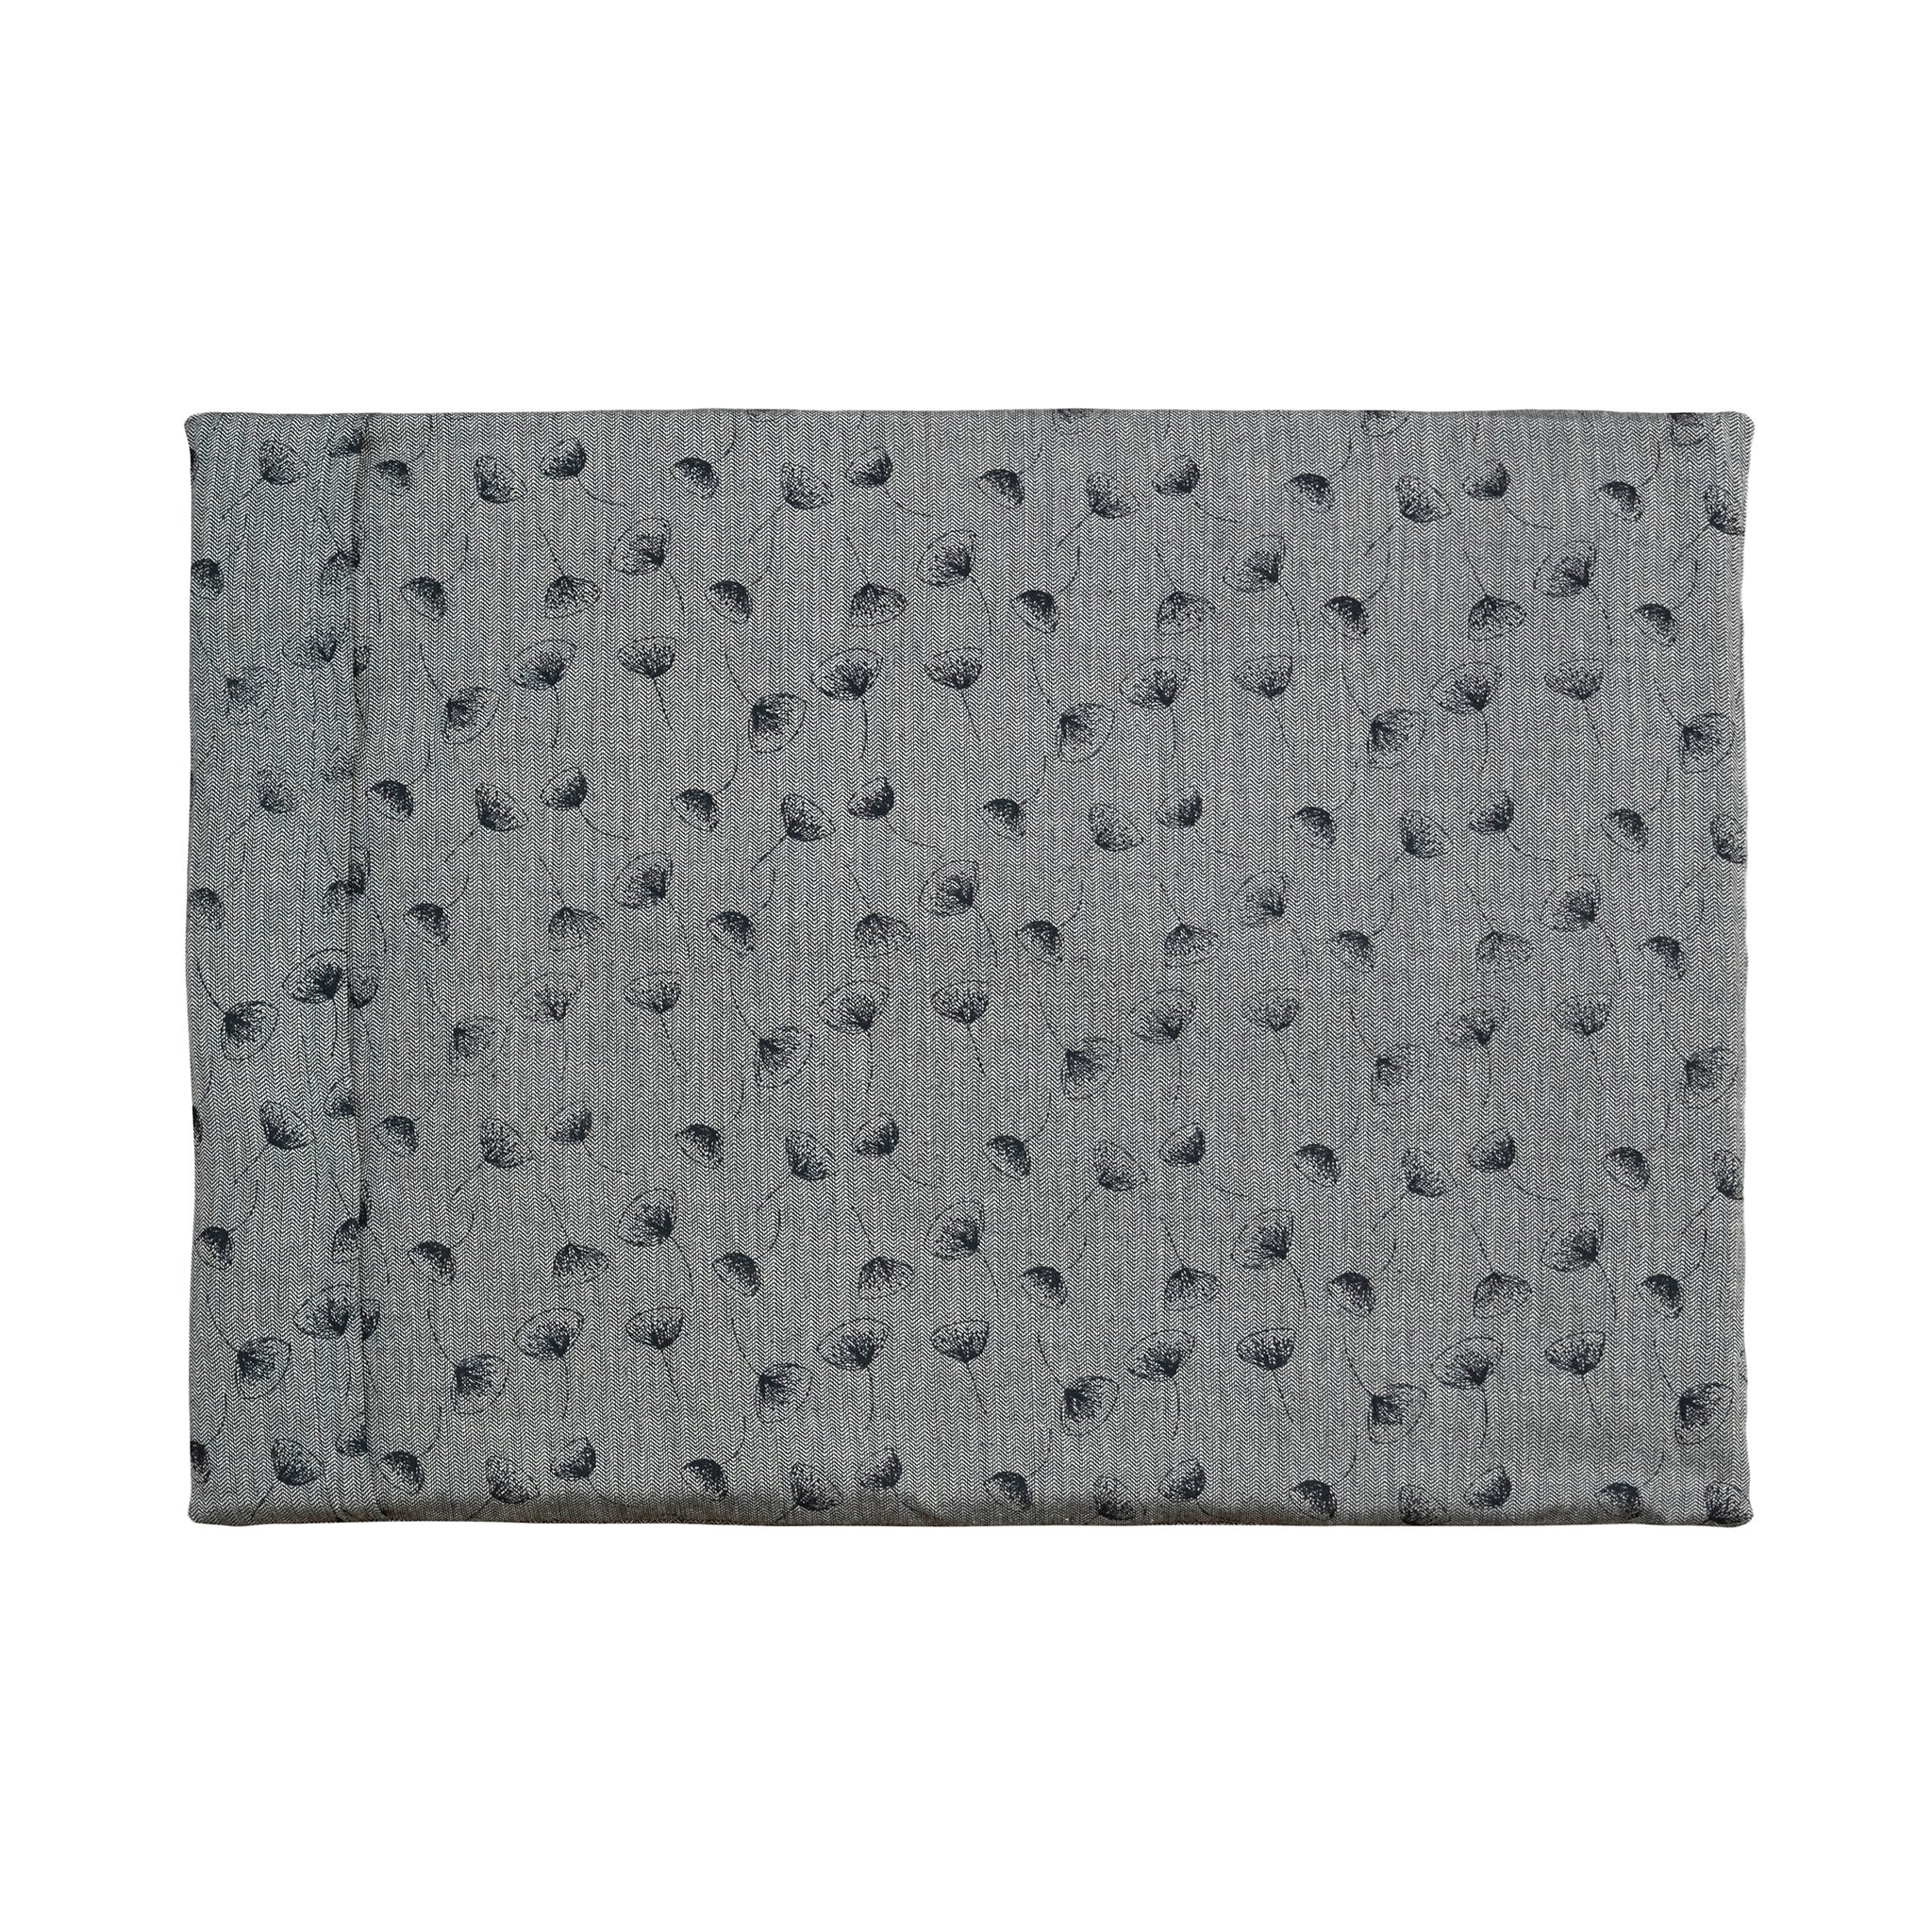 A Chimney Sheep Luxury felted wool dog bed. The bed is large and rectangular. This luxury wool dog bed is placed onto a white background. The organic cotton cover is patterned. The pattern is grey with black flowers